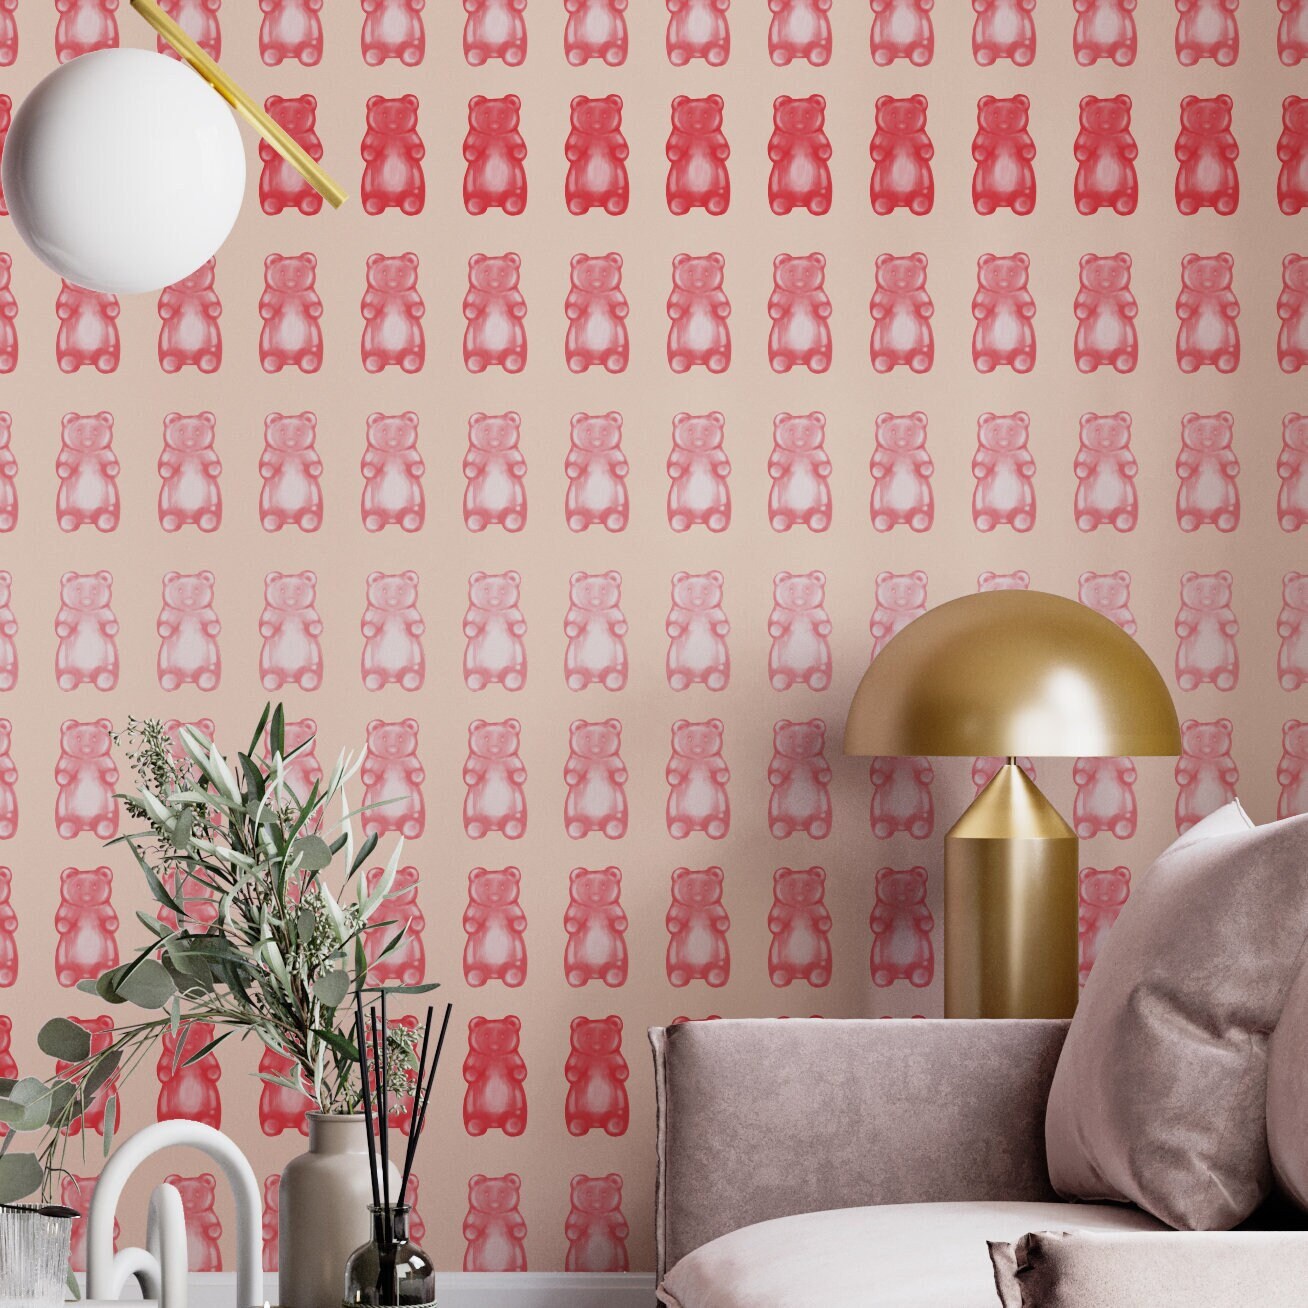 Candy Wallpaper - Etsy